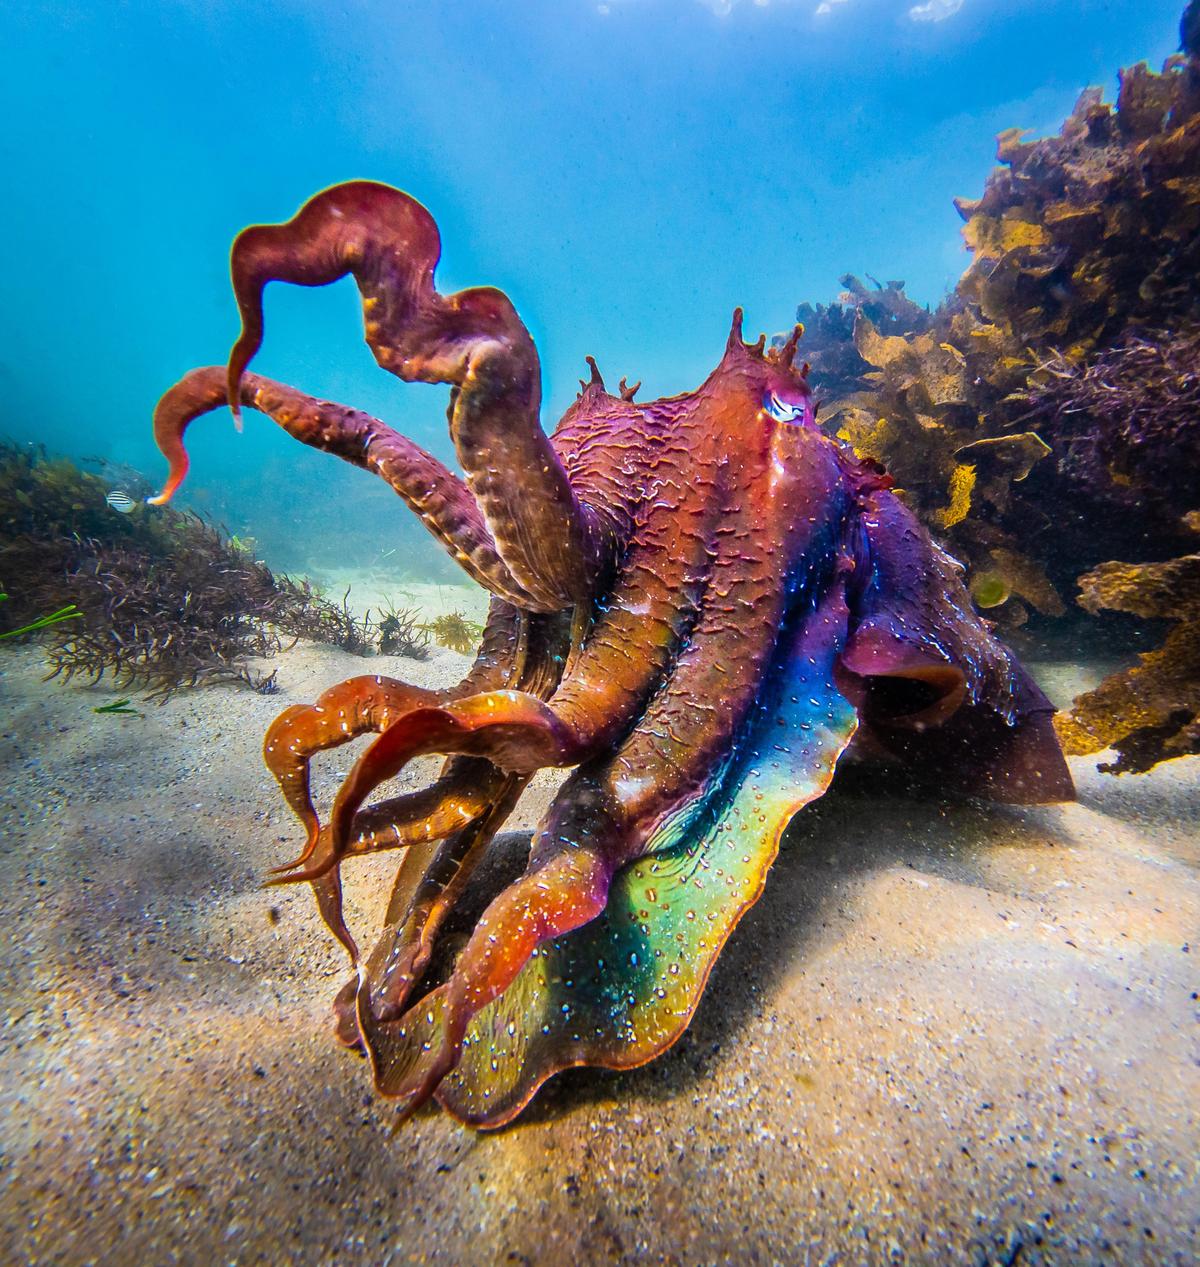 A rainbow-colored male cuttlefish making a grab for the photographer's lens (Caters News)